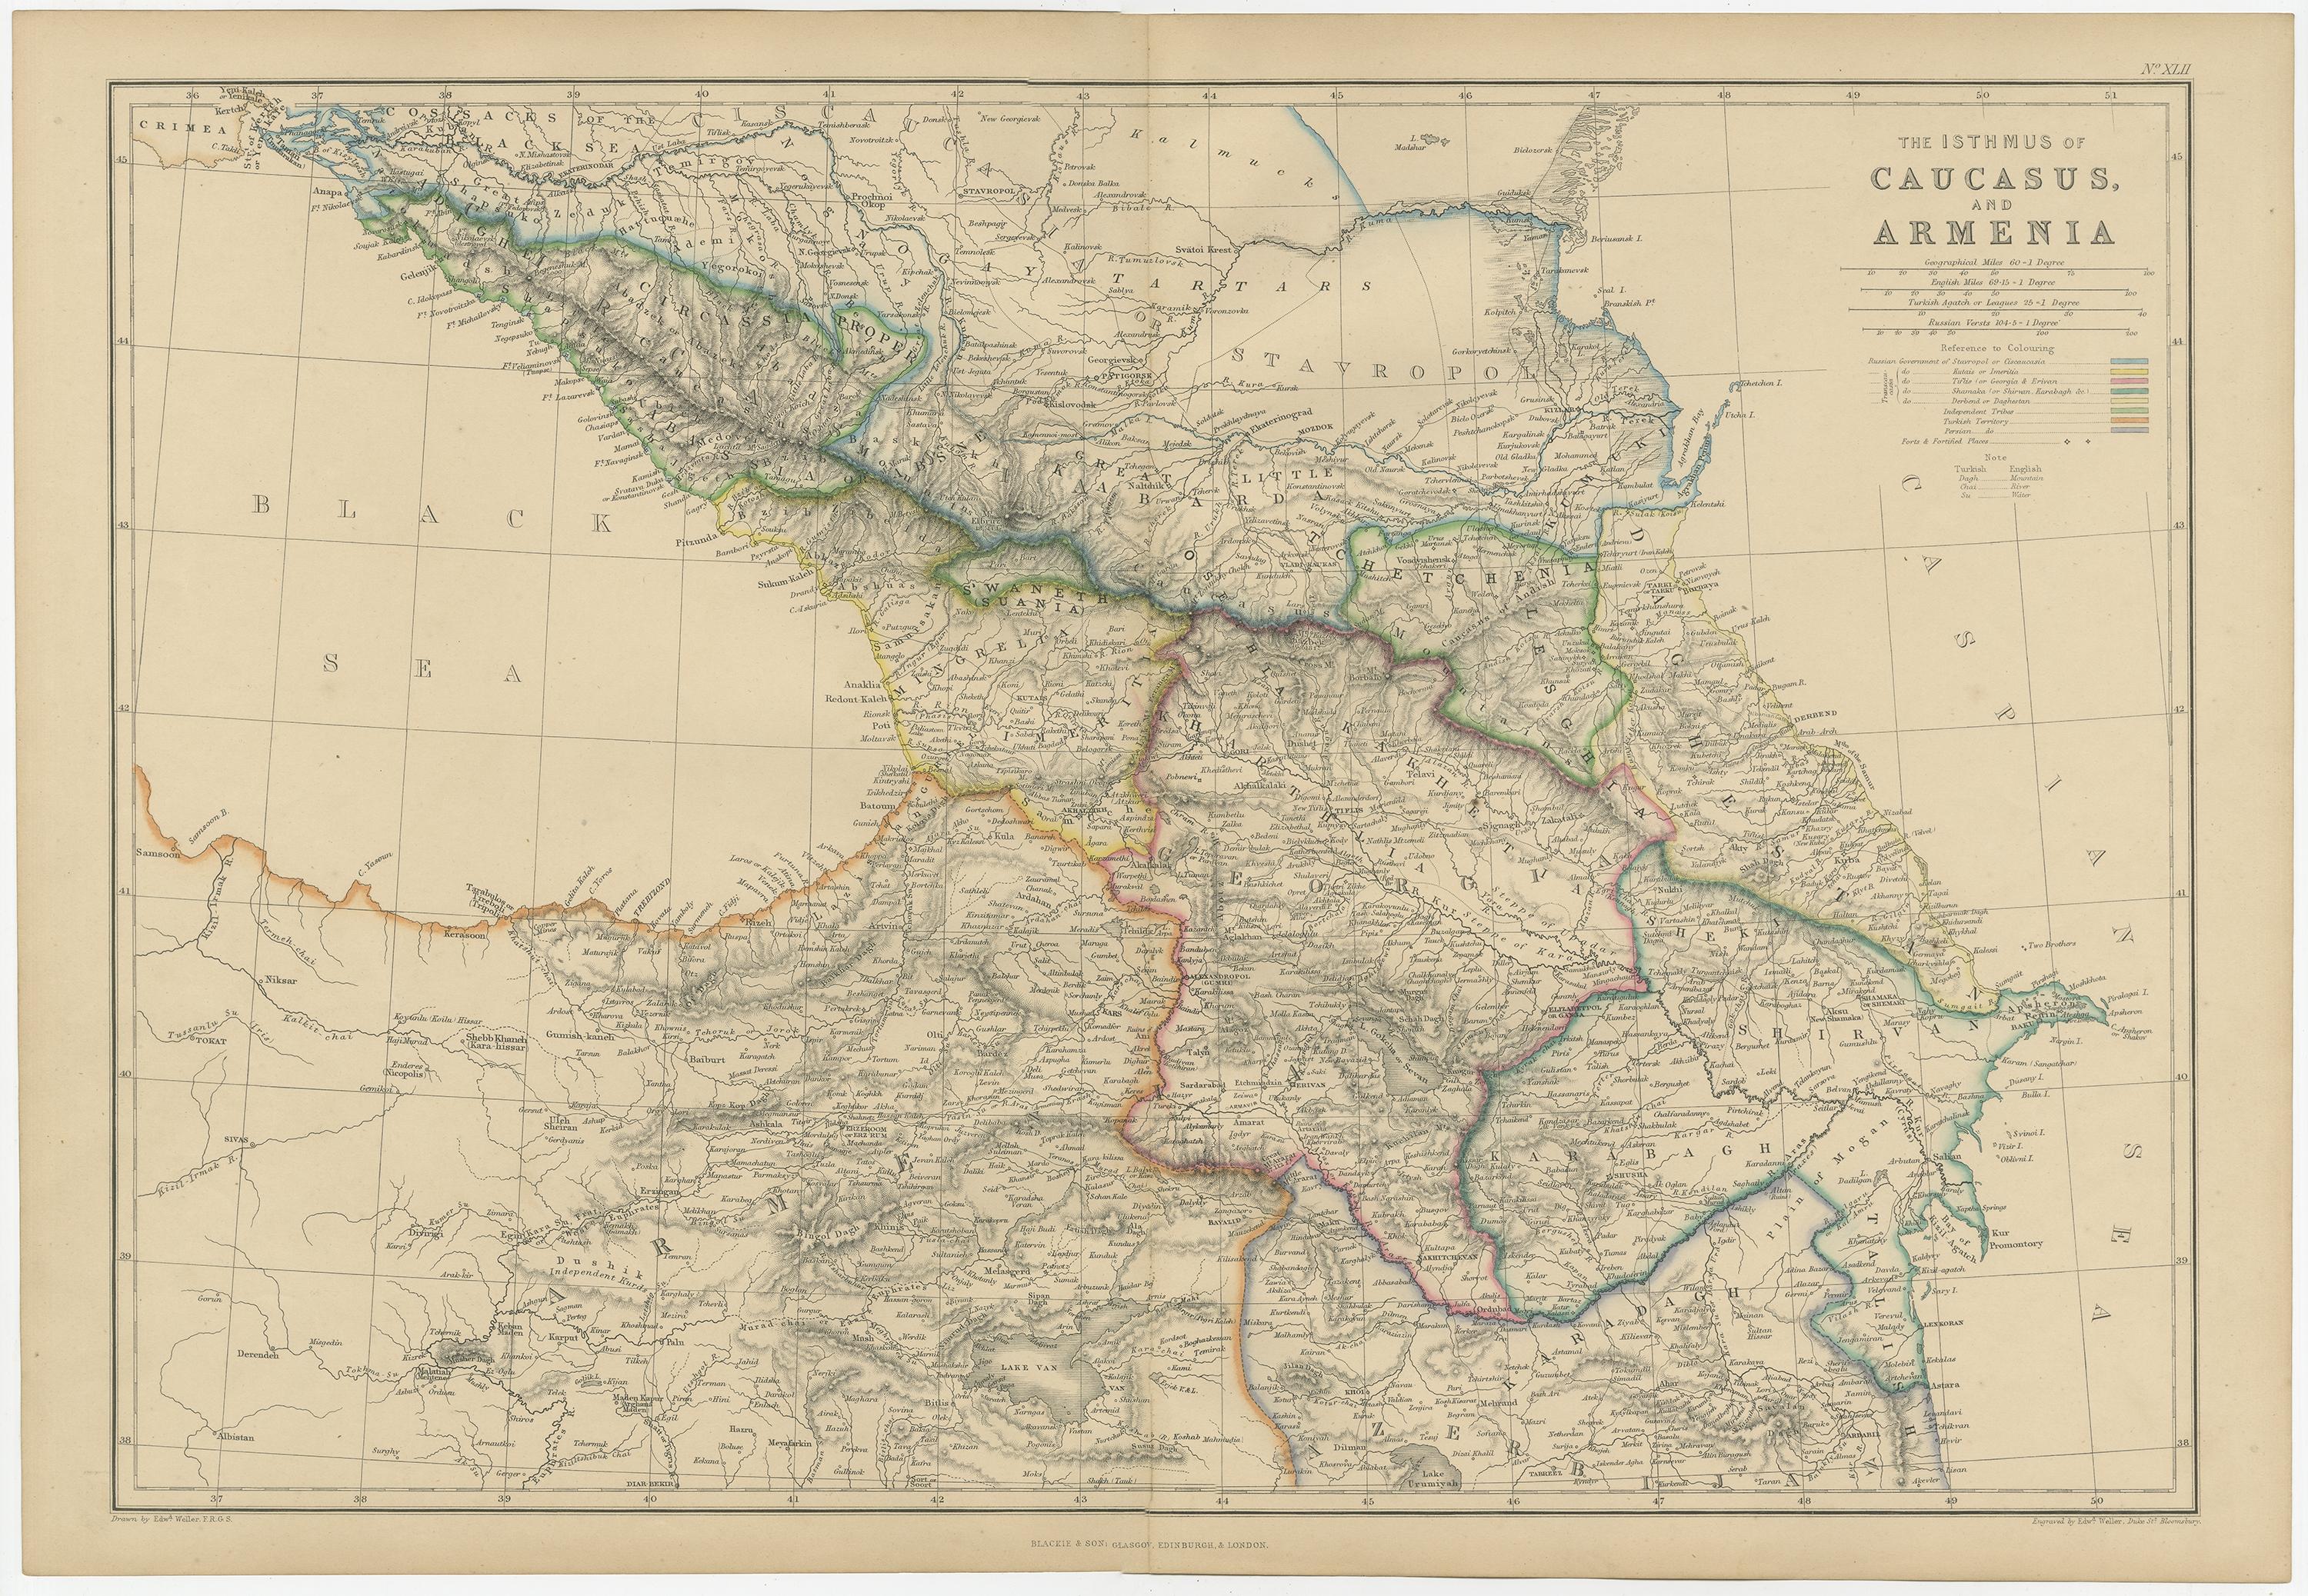 19th Century Antique Map of the Caucasus and Armenia by W. G. Blackie, 1859